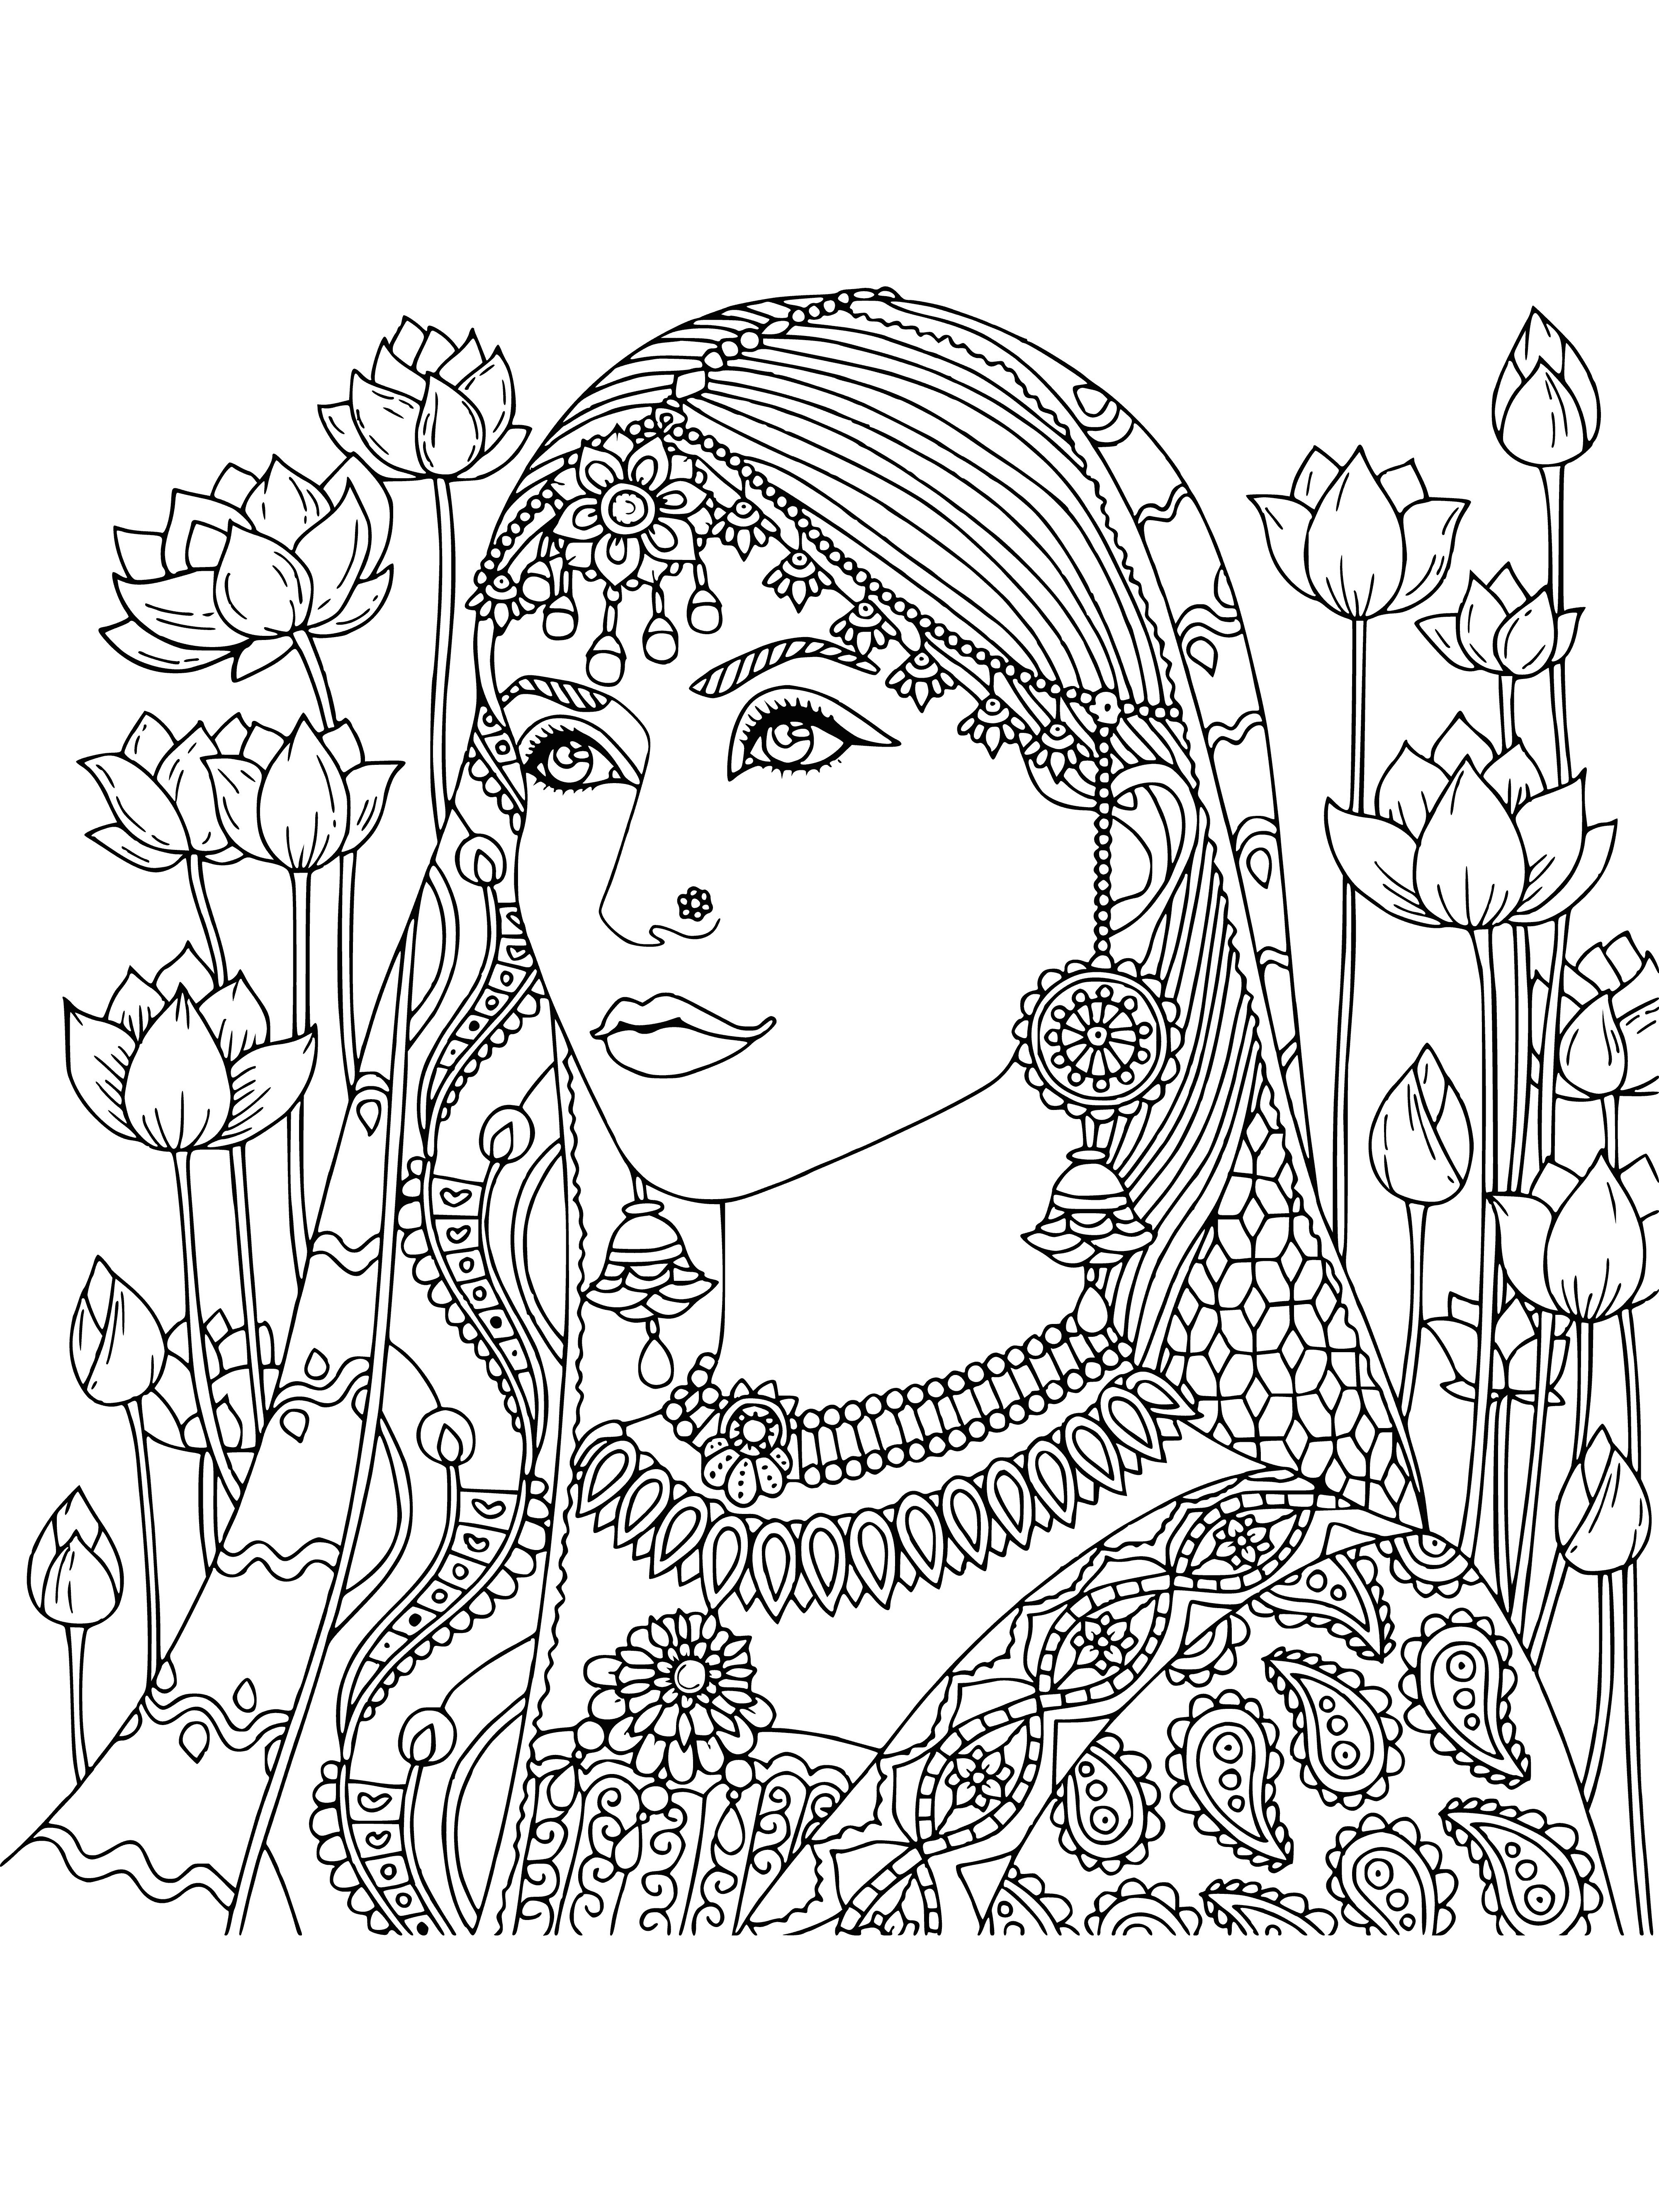 coloring page: Two happy girls in Indian outfits sit beneath a tree. One reads a book while the other rests with eyes closed.